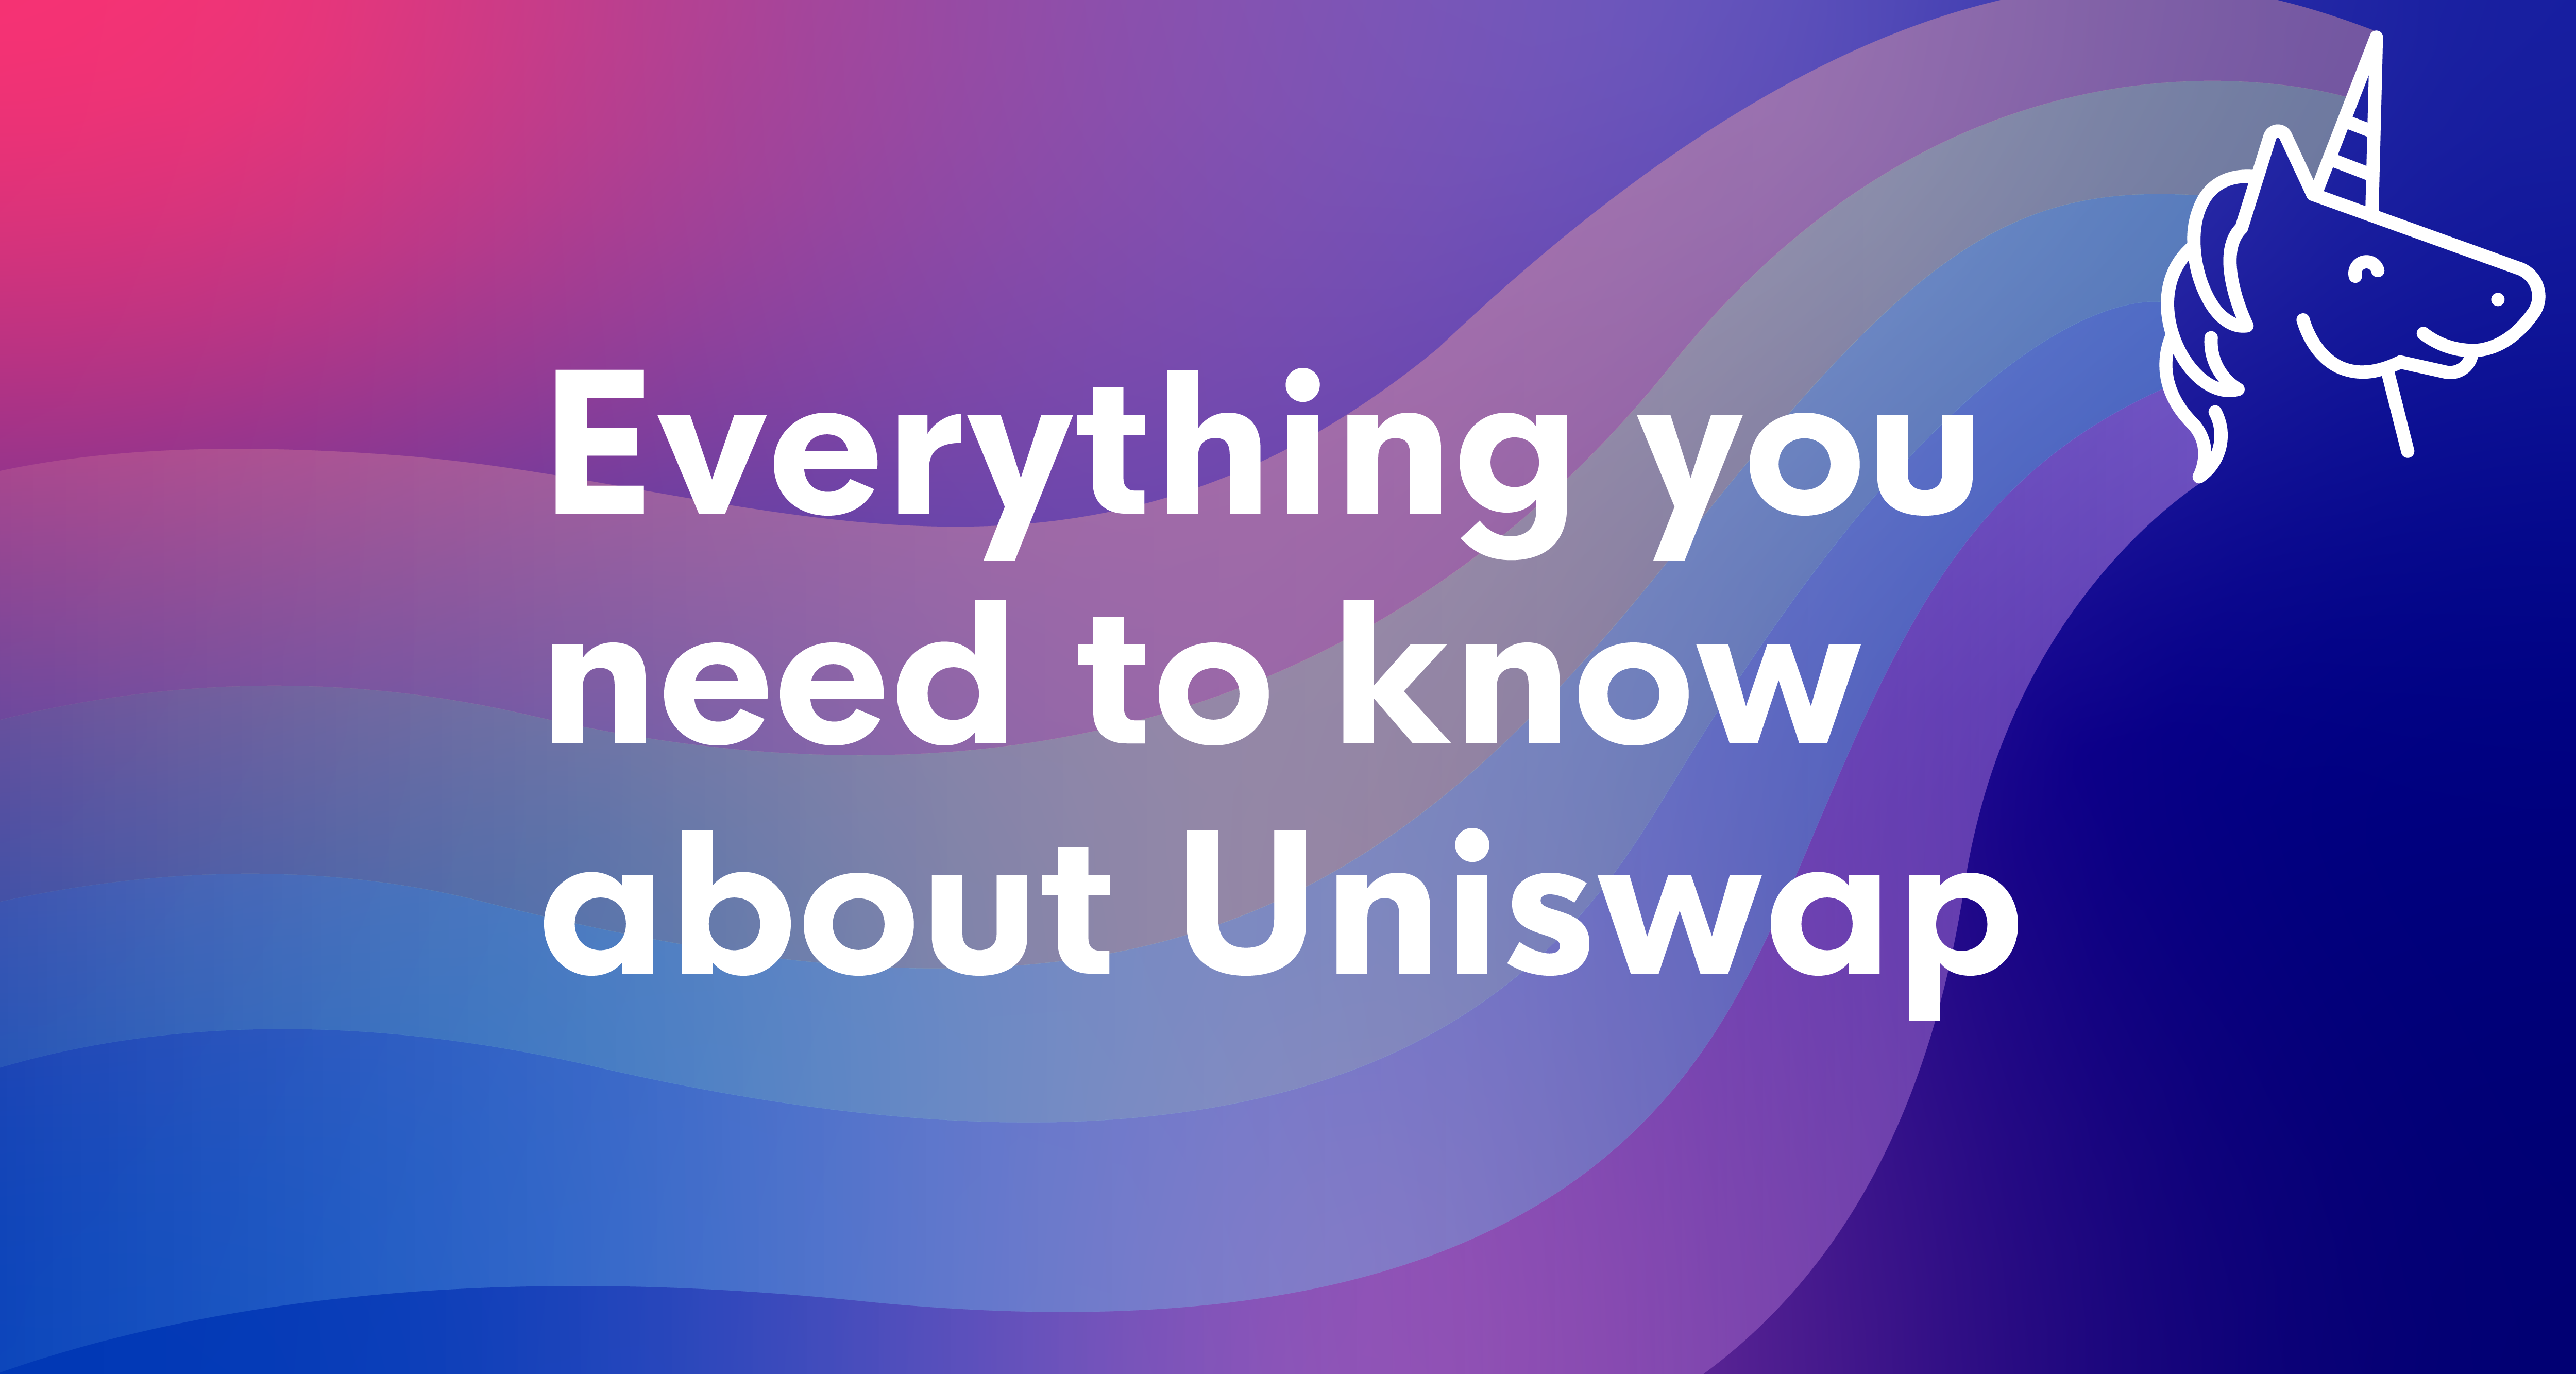 Everything you need to know about Uniswap